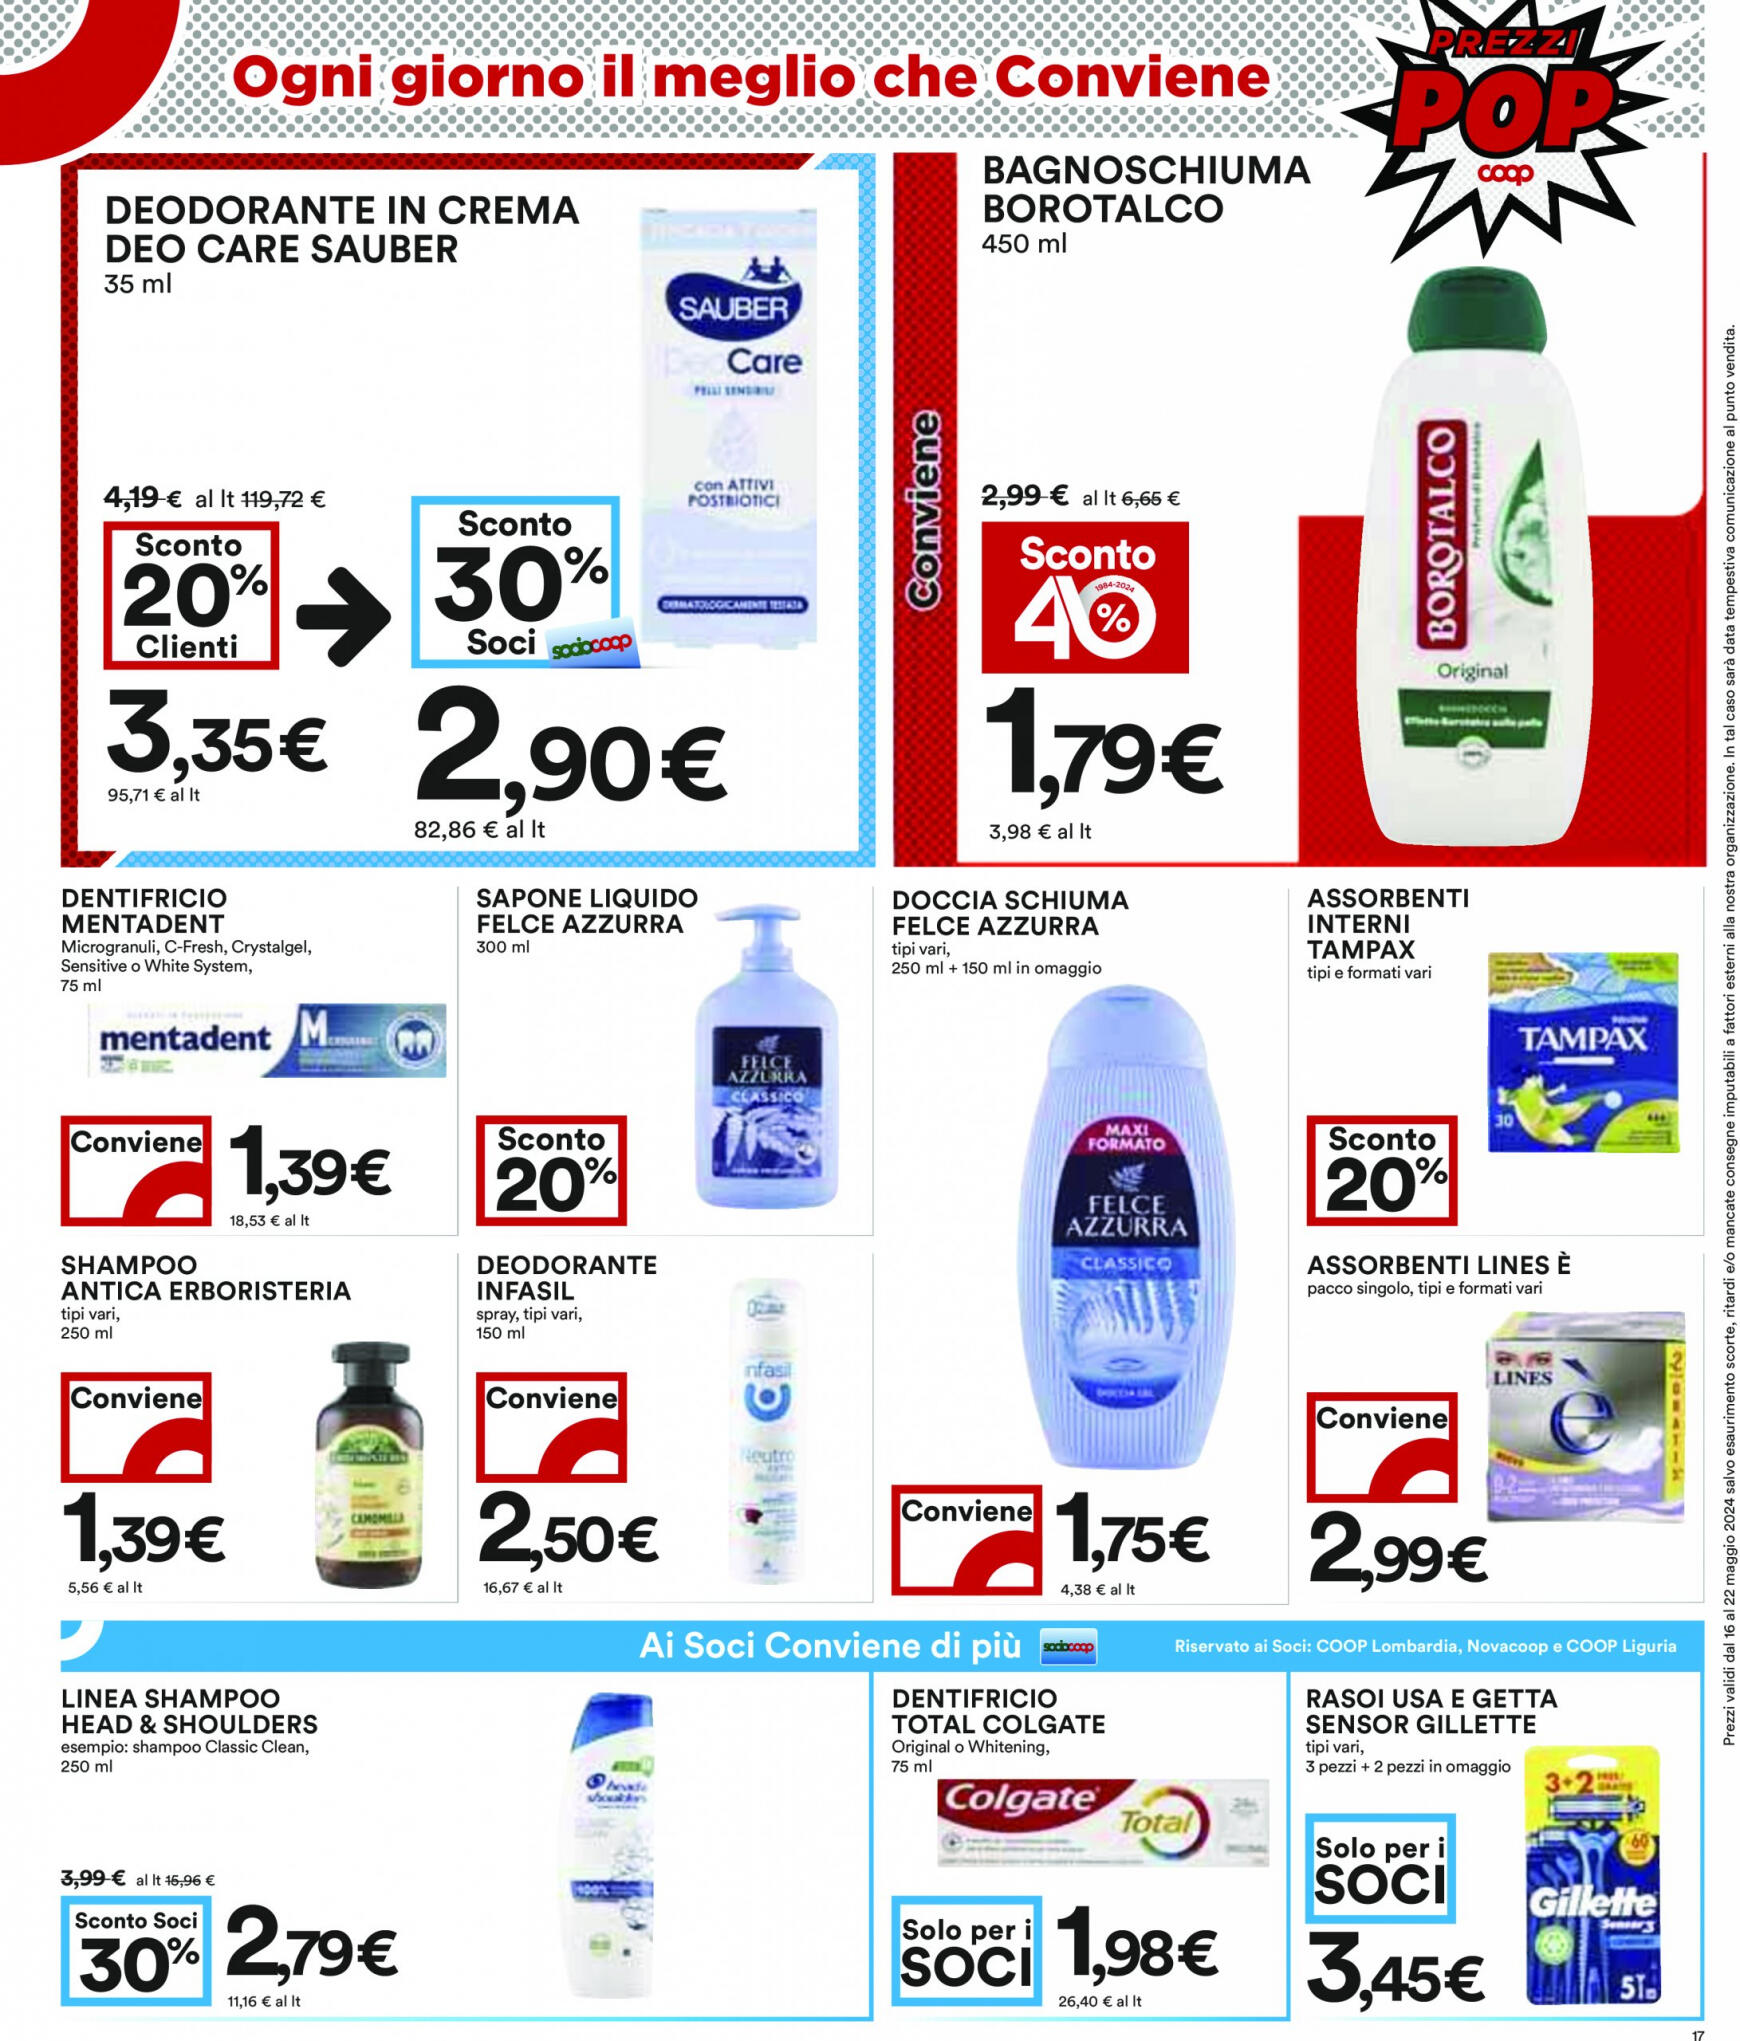 coop - Nuovo volantino Coop 16.05. - 22.05. - page: 17